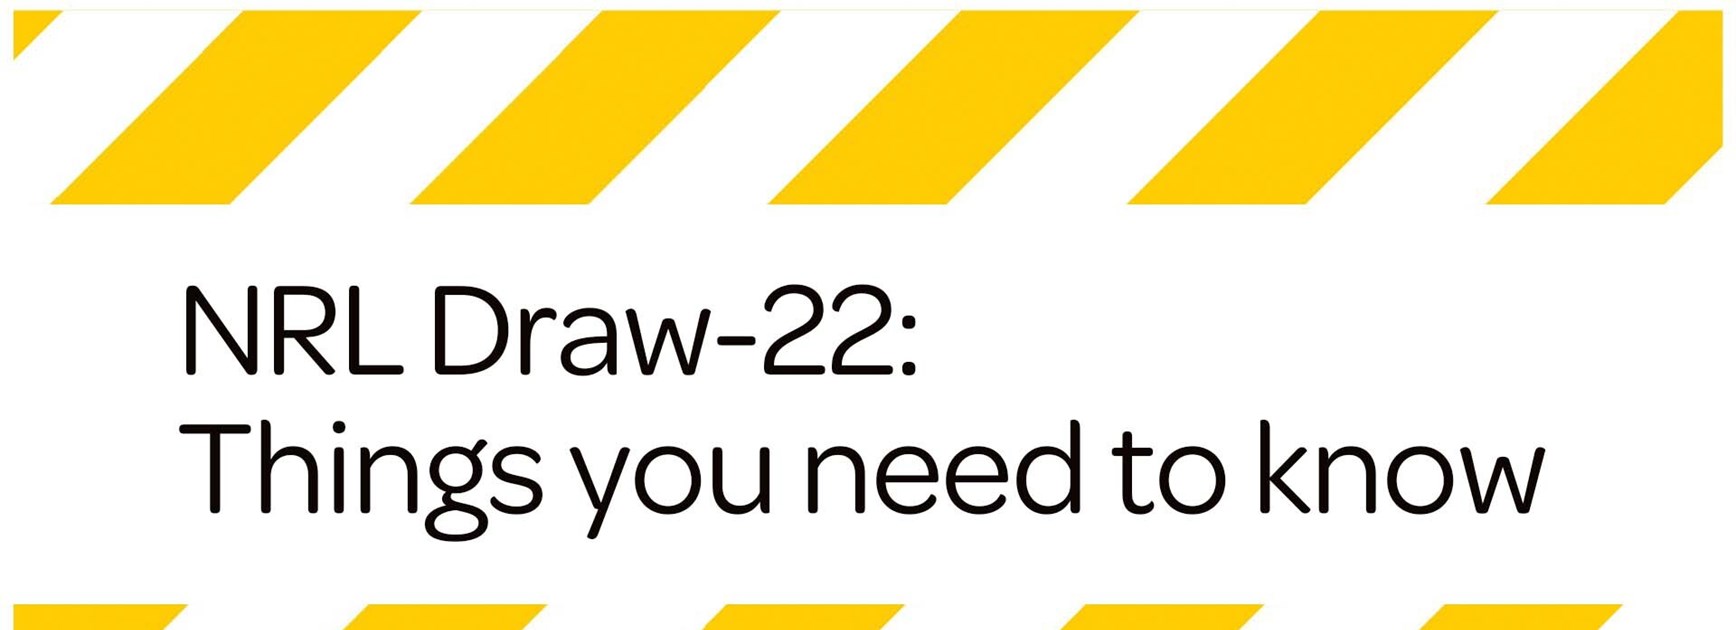 Draw-22: Taking a deep dive into all the detail